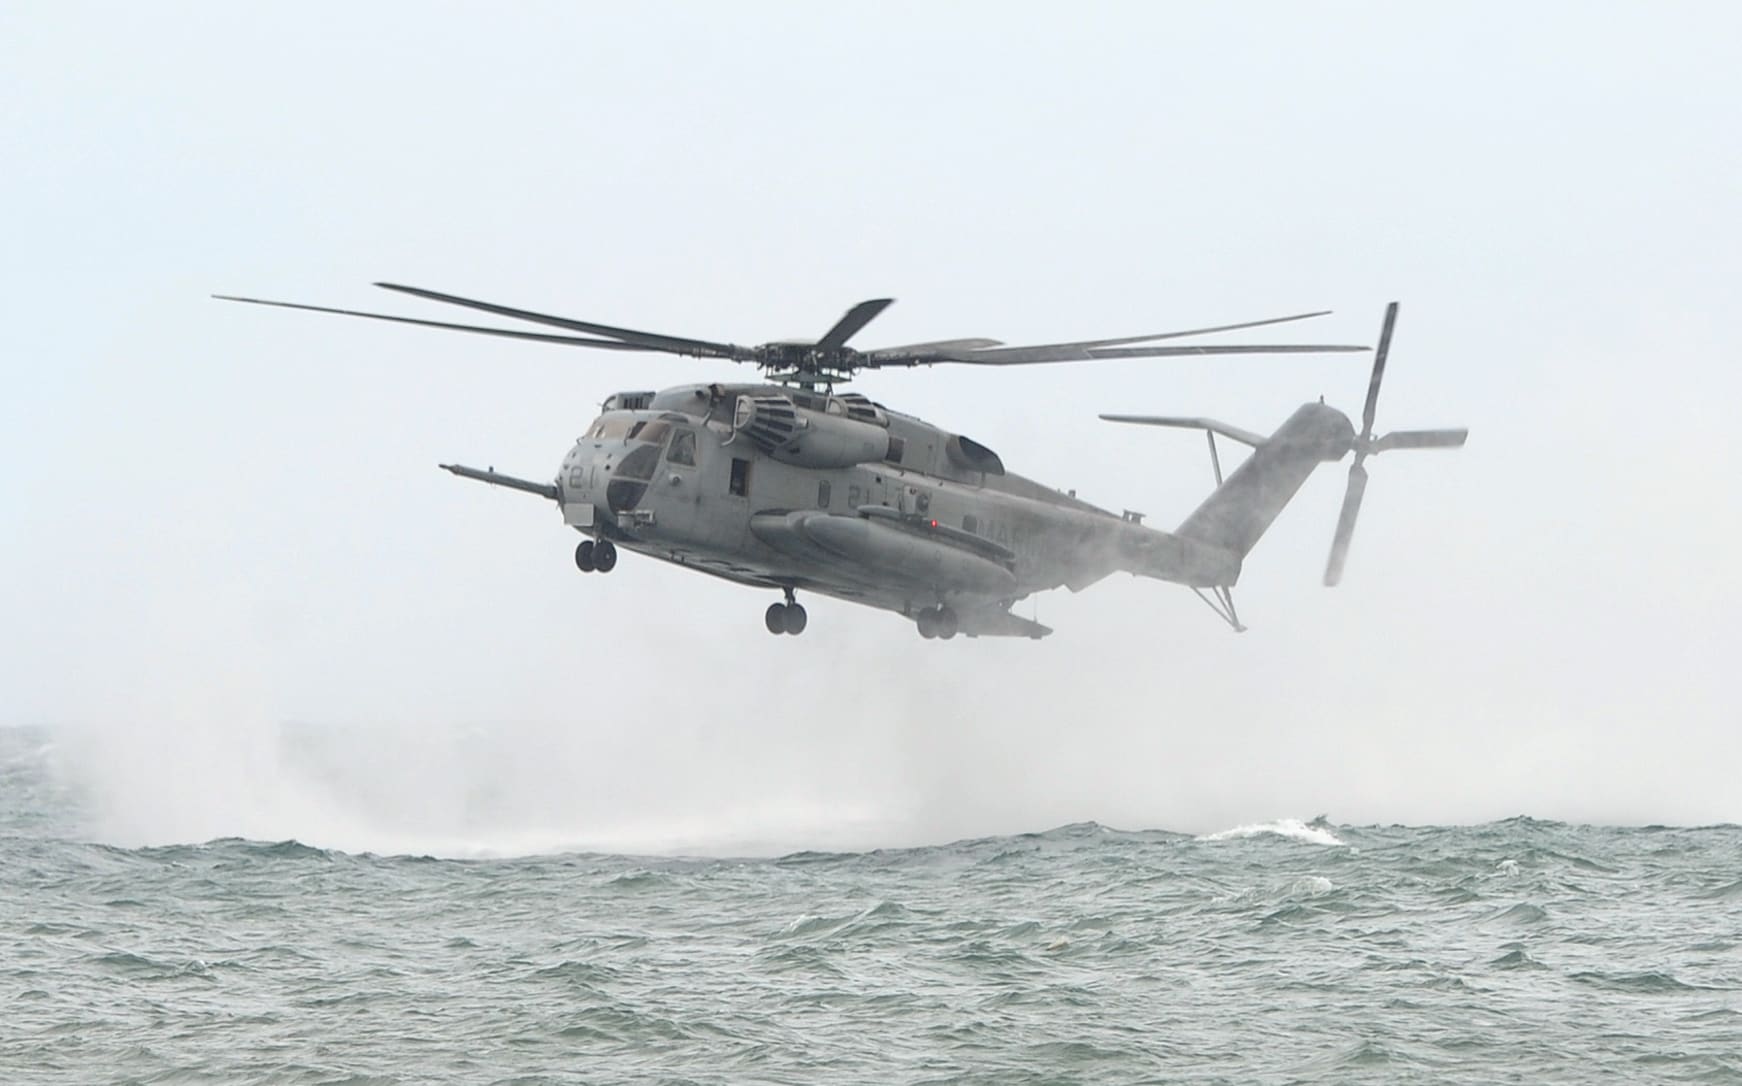 A CH-53E Super Stallion heavy lift assault helicopter hovers above the sea.